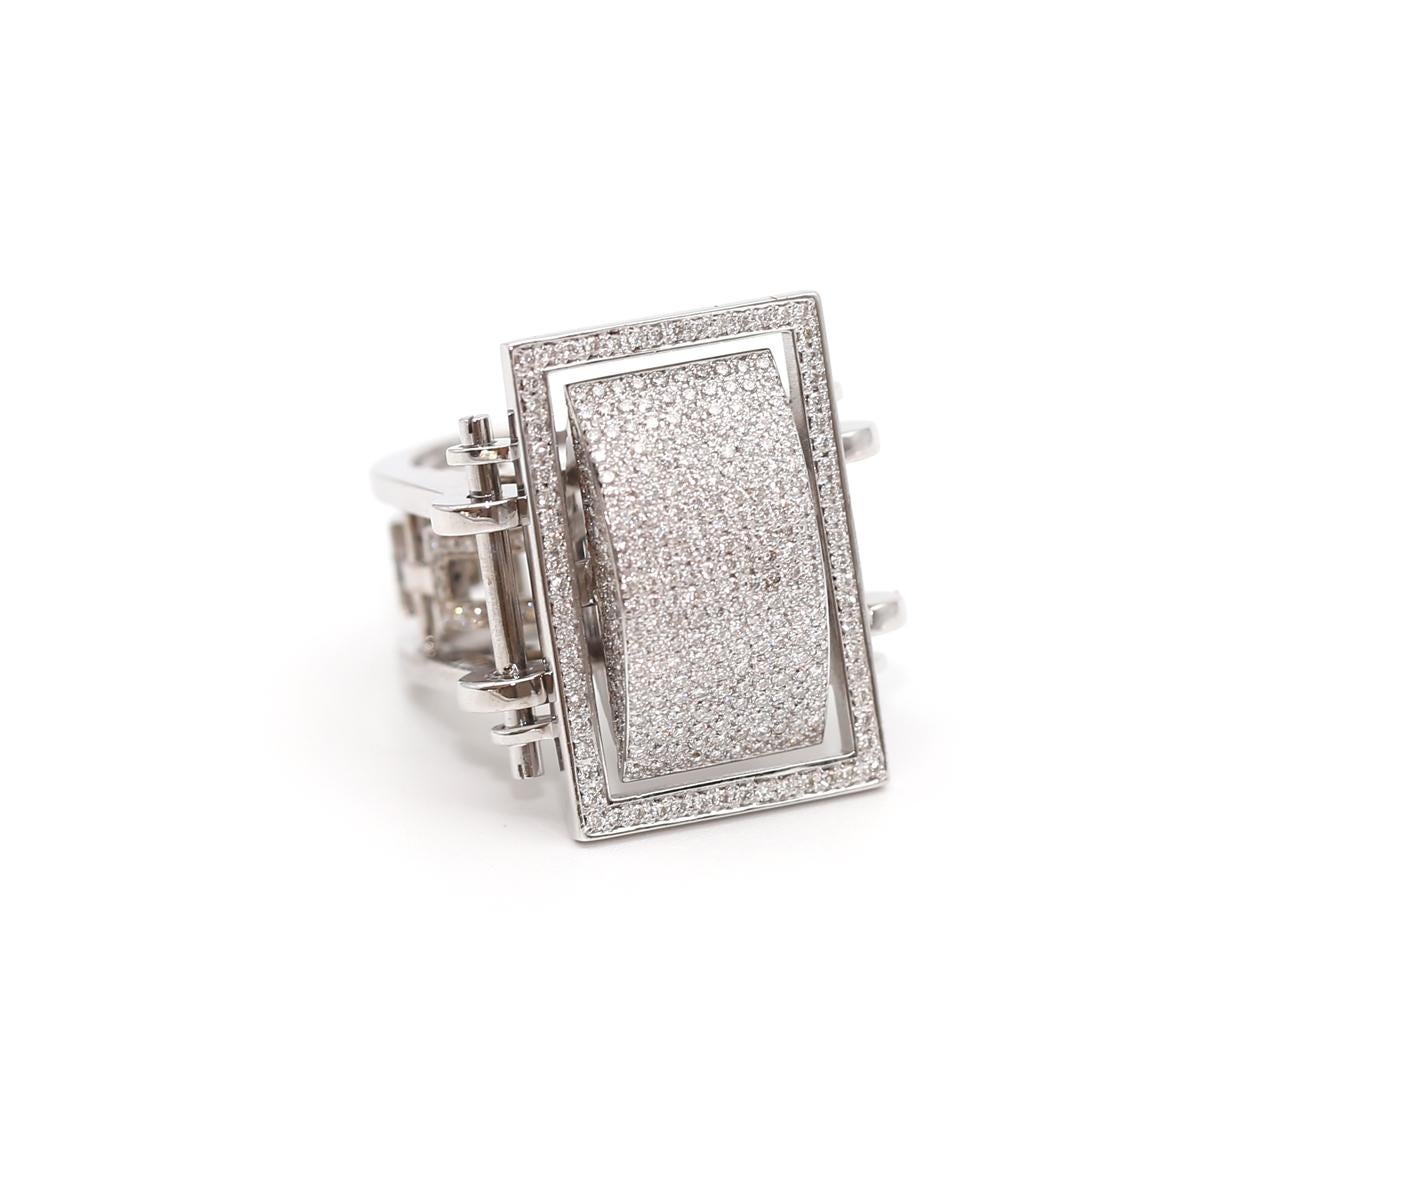 A true one-of-a-kind ring. With approximately 3 Carats of fine Diamonds finished in an 18K White Gold. Perfectly Geometrical design. Created in 200.

It is a bold statement of a ring. It will grab attention on any occasion. Could be worn daily yet